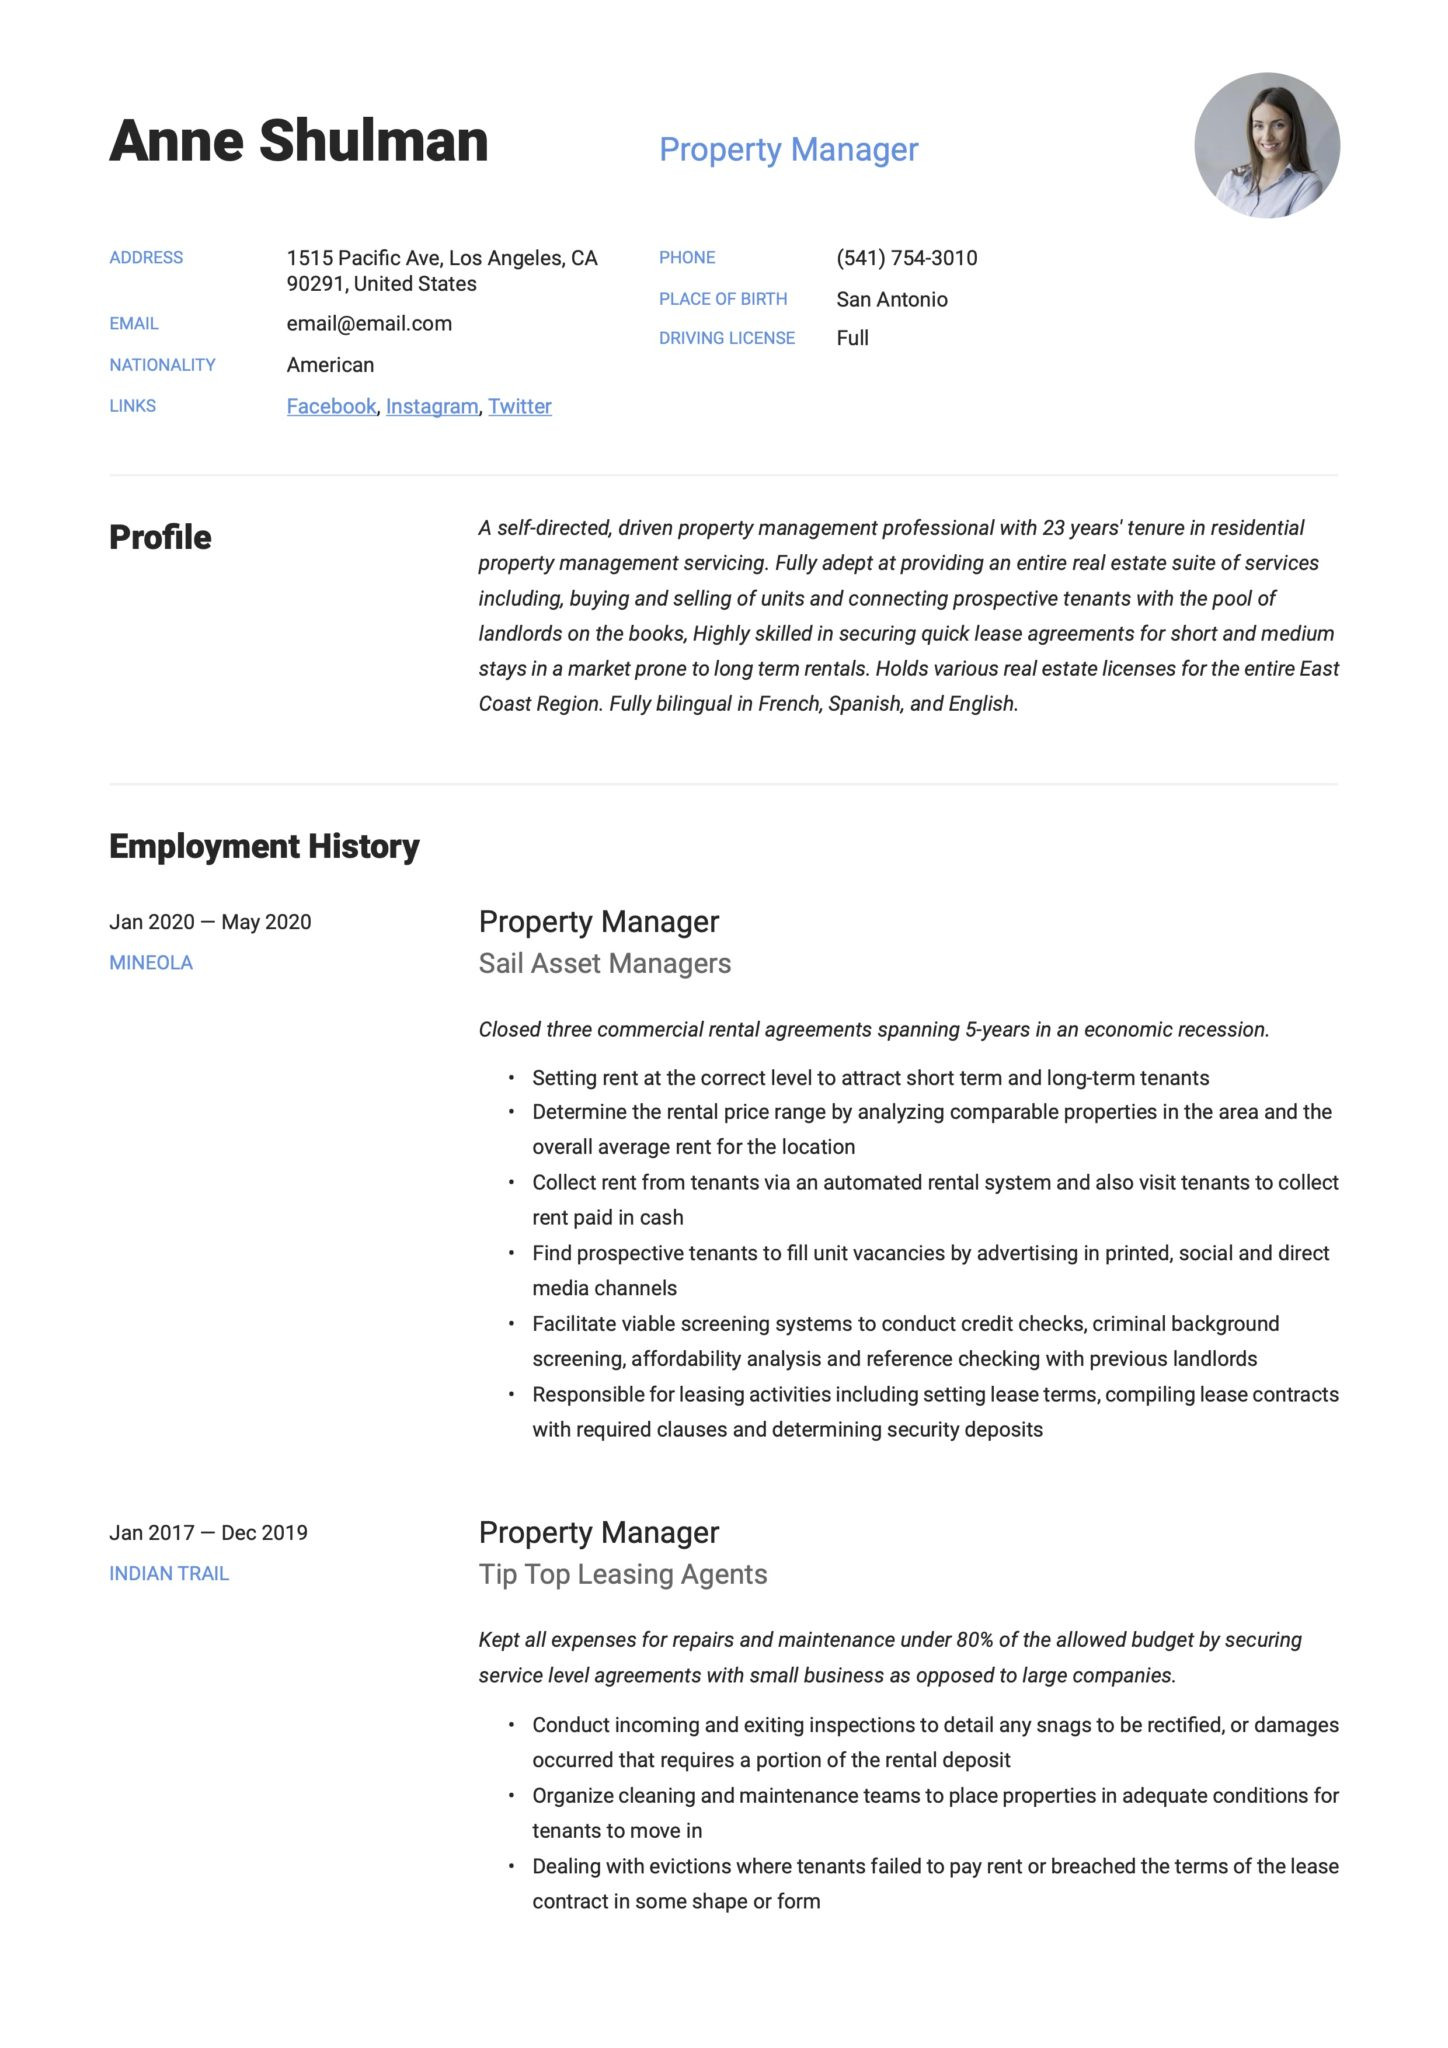 Best Apartment Community Manager Sample Resume Property Manager Resume & Writing Guide  18 Templates 2020